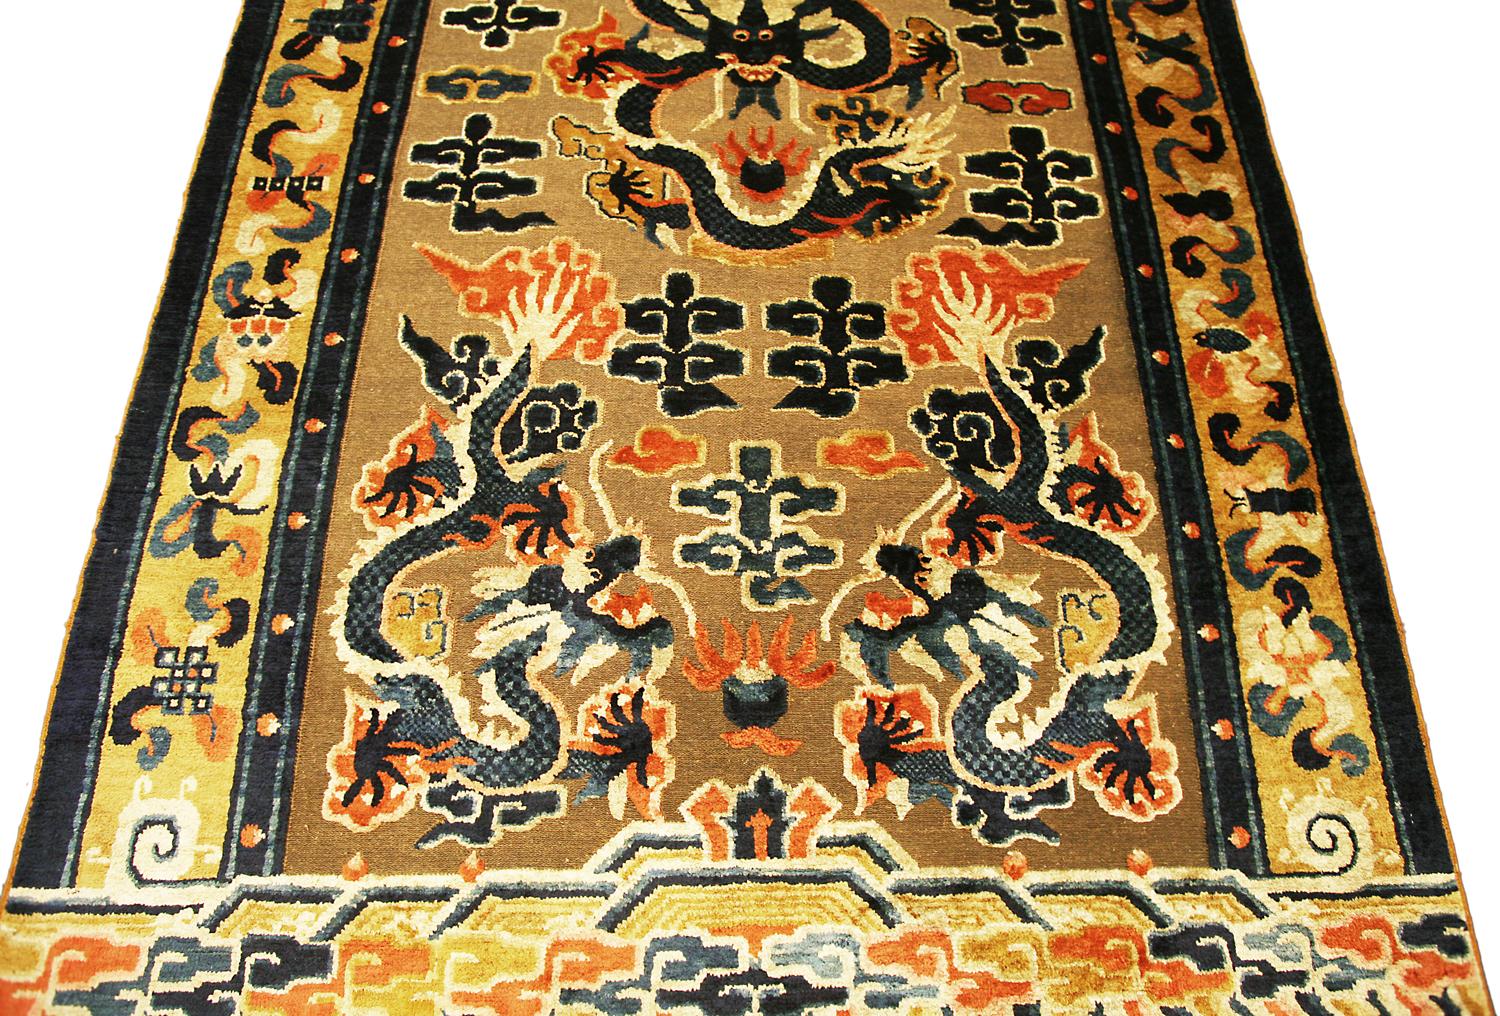 Hand-Woven 19th Century Ningxia Brown Metal-Thread Imperial Palace Souf Chinese Rug For Sale